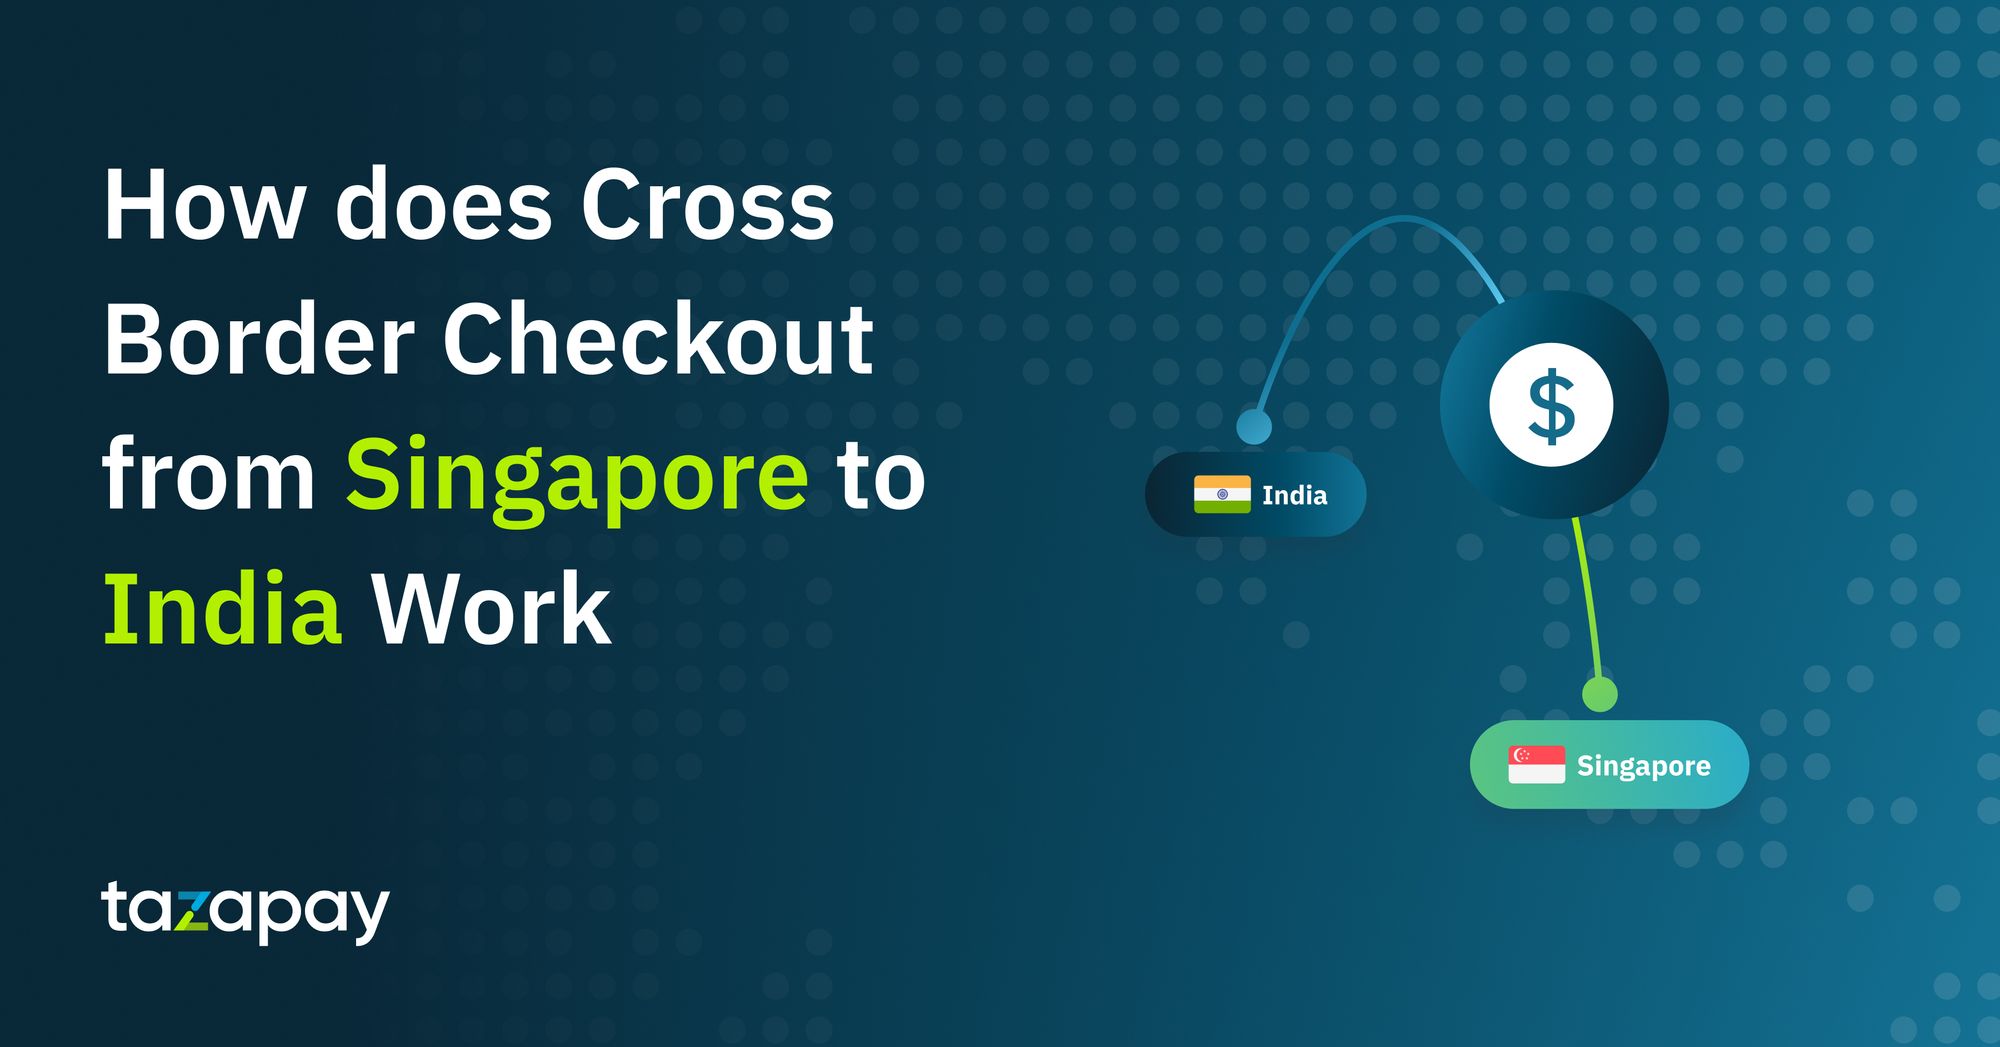 Payment Gateway Rails: How Does Cross Border Checkout from Singapore to India Work?